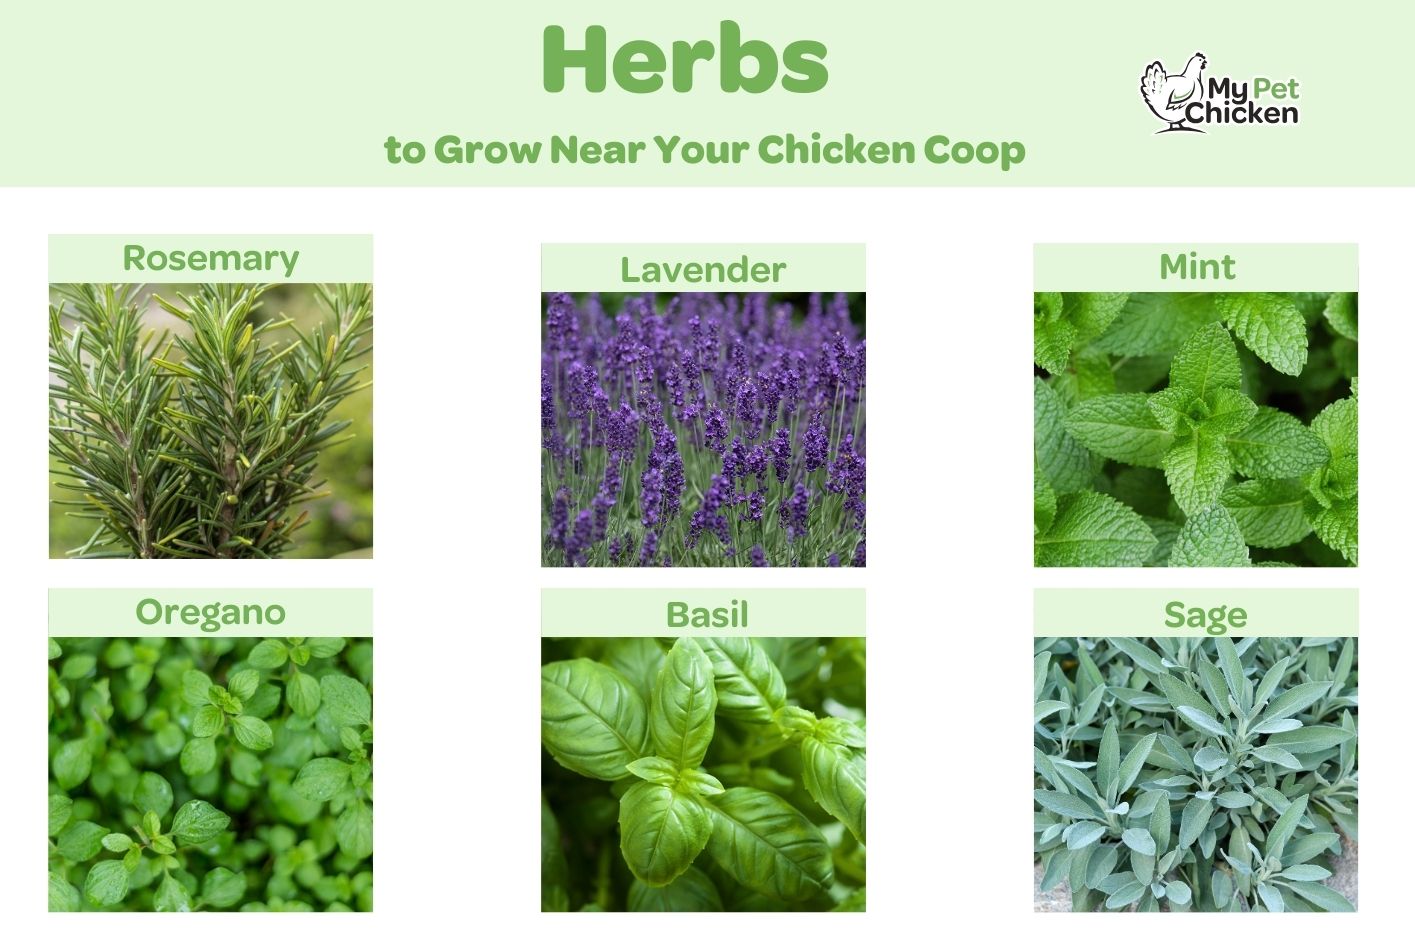 Oregano is one of the best herbs to grow near your chicken coop.